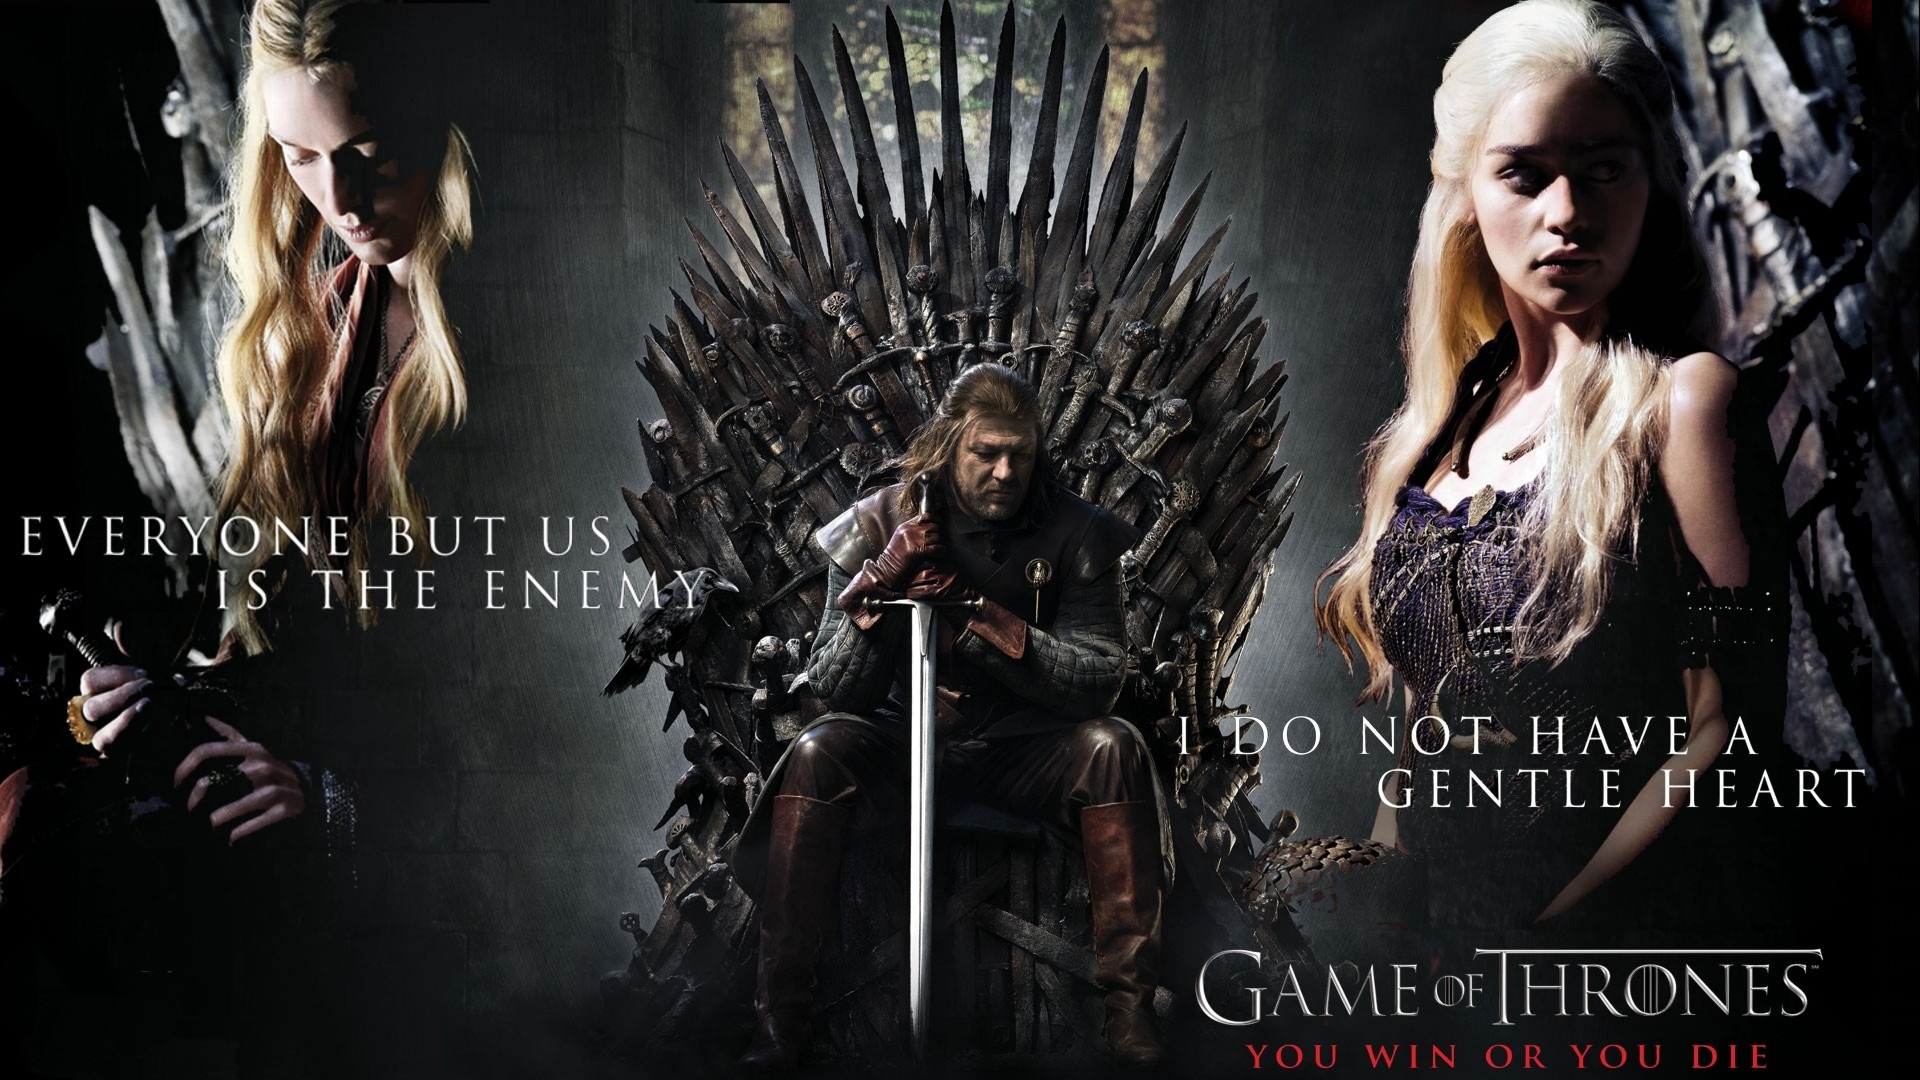 A Song of Ice and Fire: Game of Thrones HD wallpapers #9 - 1920x1080